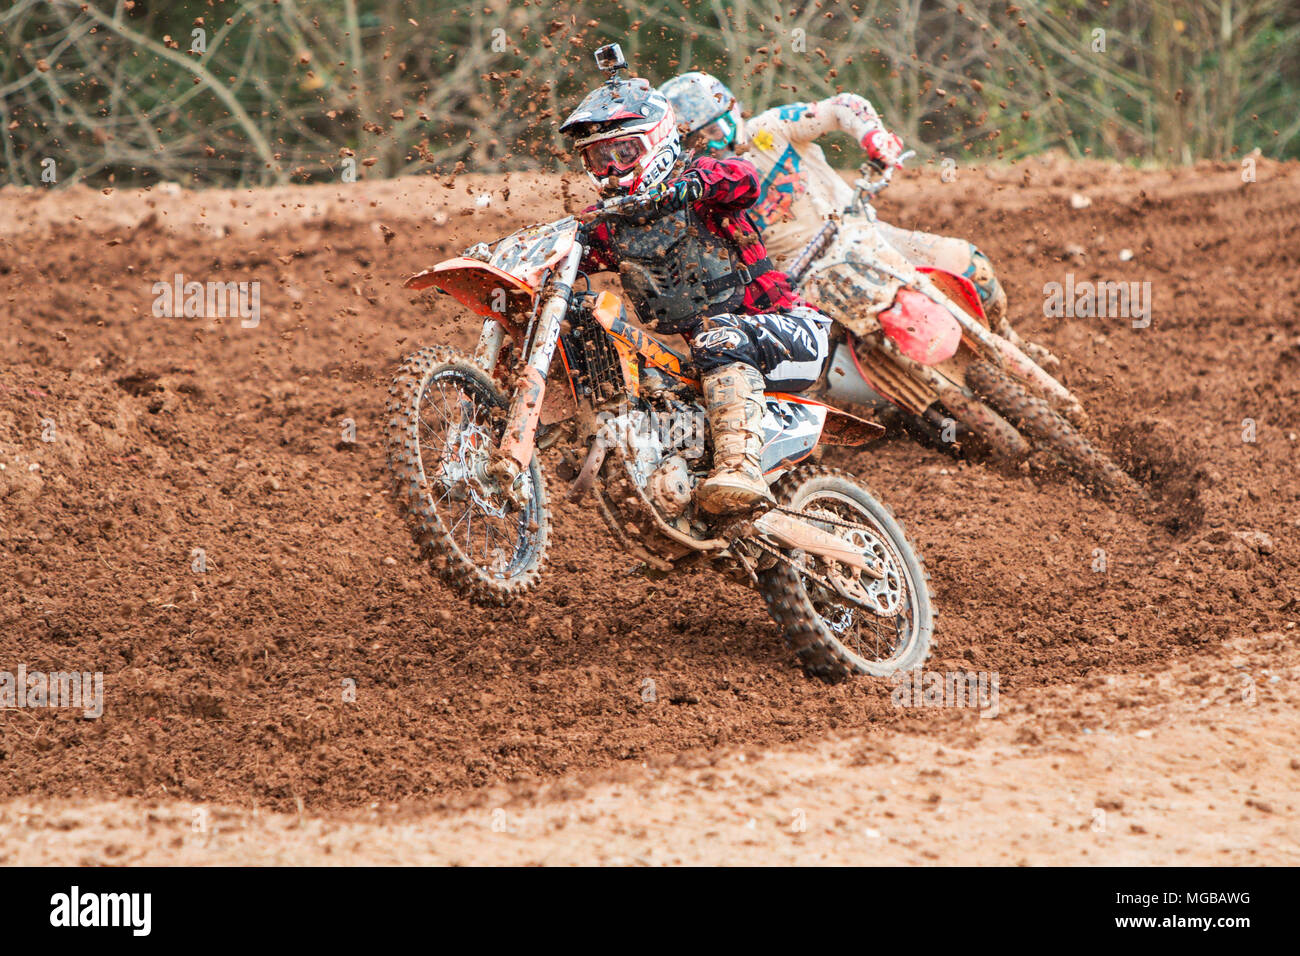 A rider pops a wheelie while accelerating out of a turn in a motocross race  at the Scrubndirt Track on December 3, 2016 in Monroe, GA Stock Photo -  Alamy